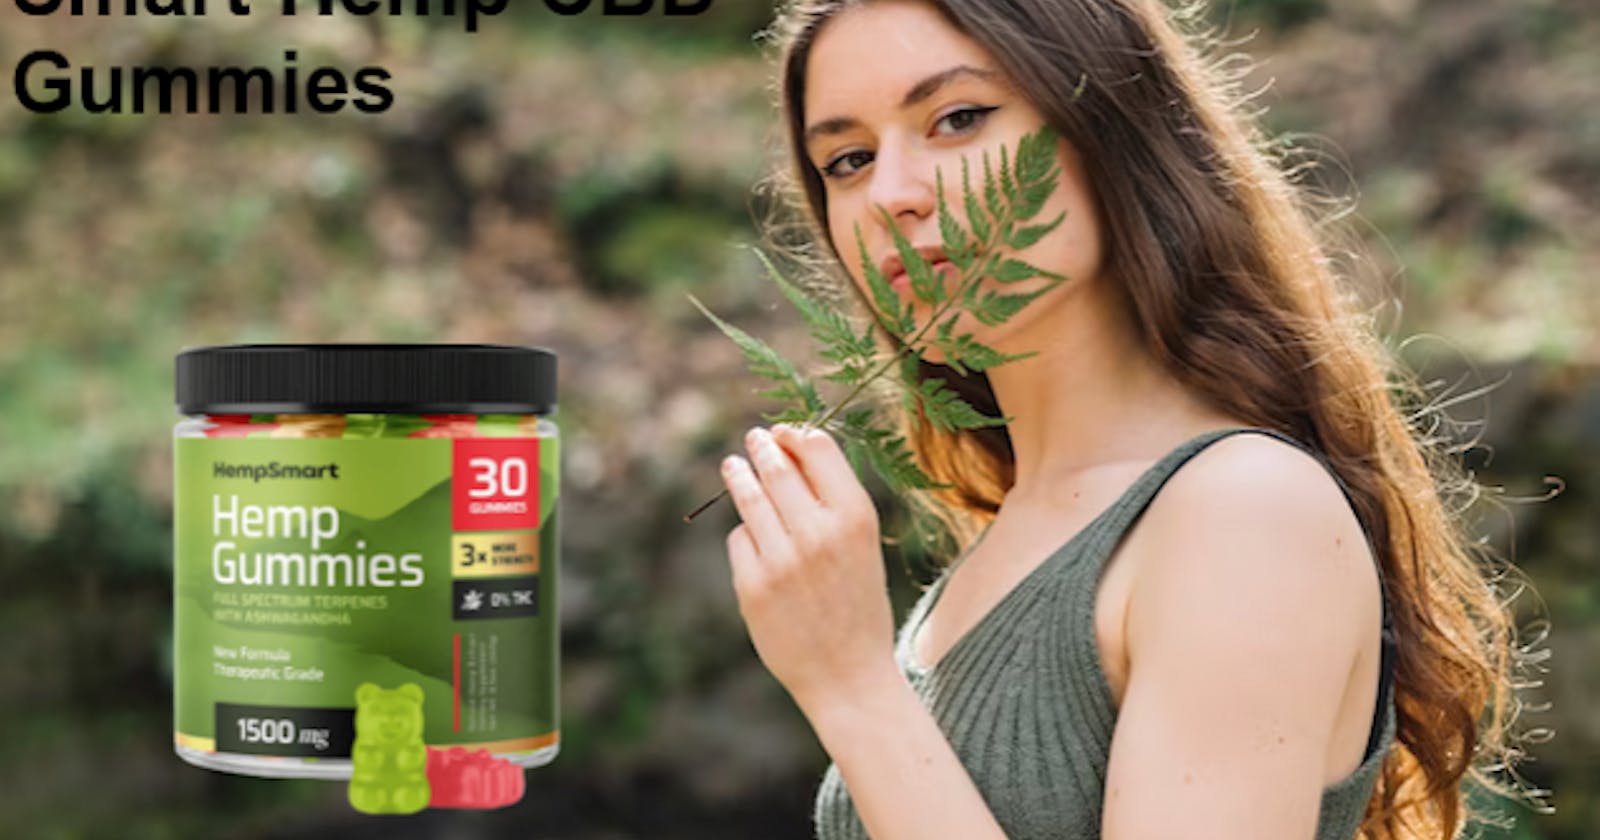 Smart Hemp Gummies Australia - Help Pain Relief, Safe Health And No Side Effects, Reviews Price & Buy!